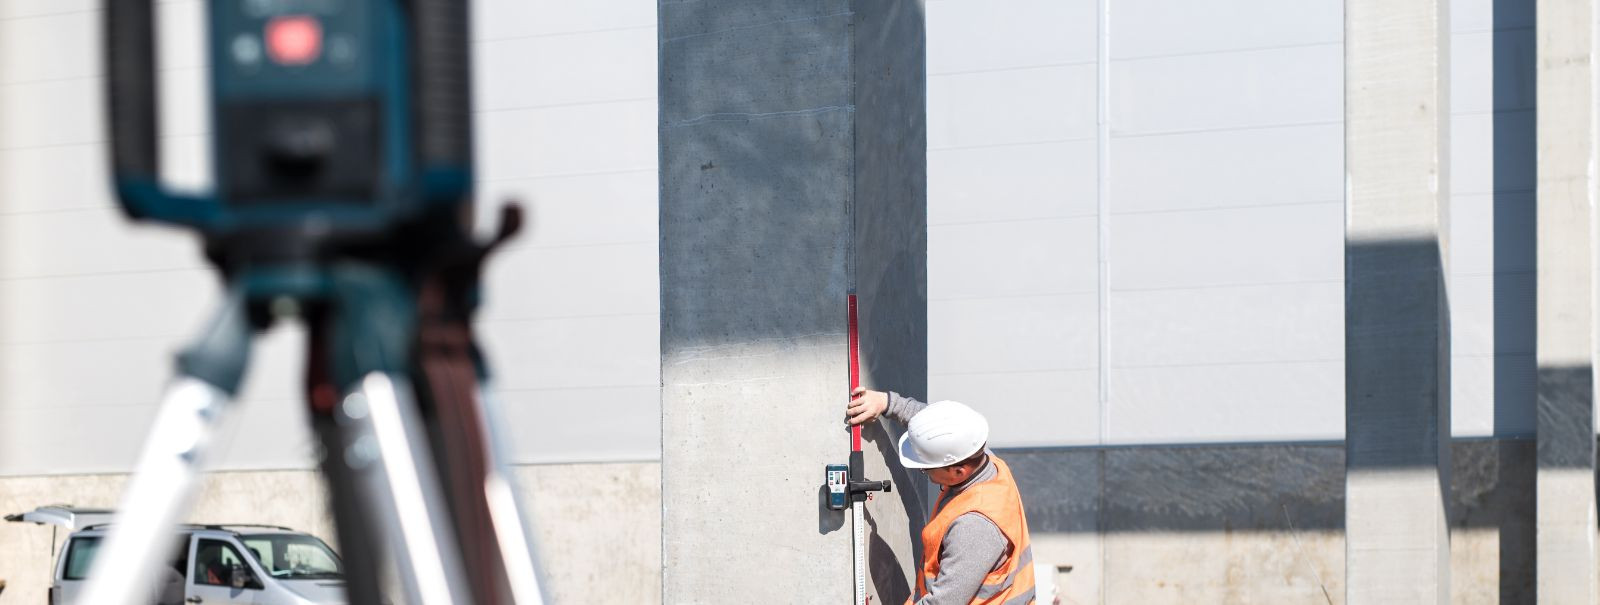 Laser scanning, also known as 3D scanning, has become a pivotal technology in the construction industry. It captures detailed three-dimensional data from object